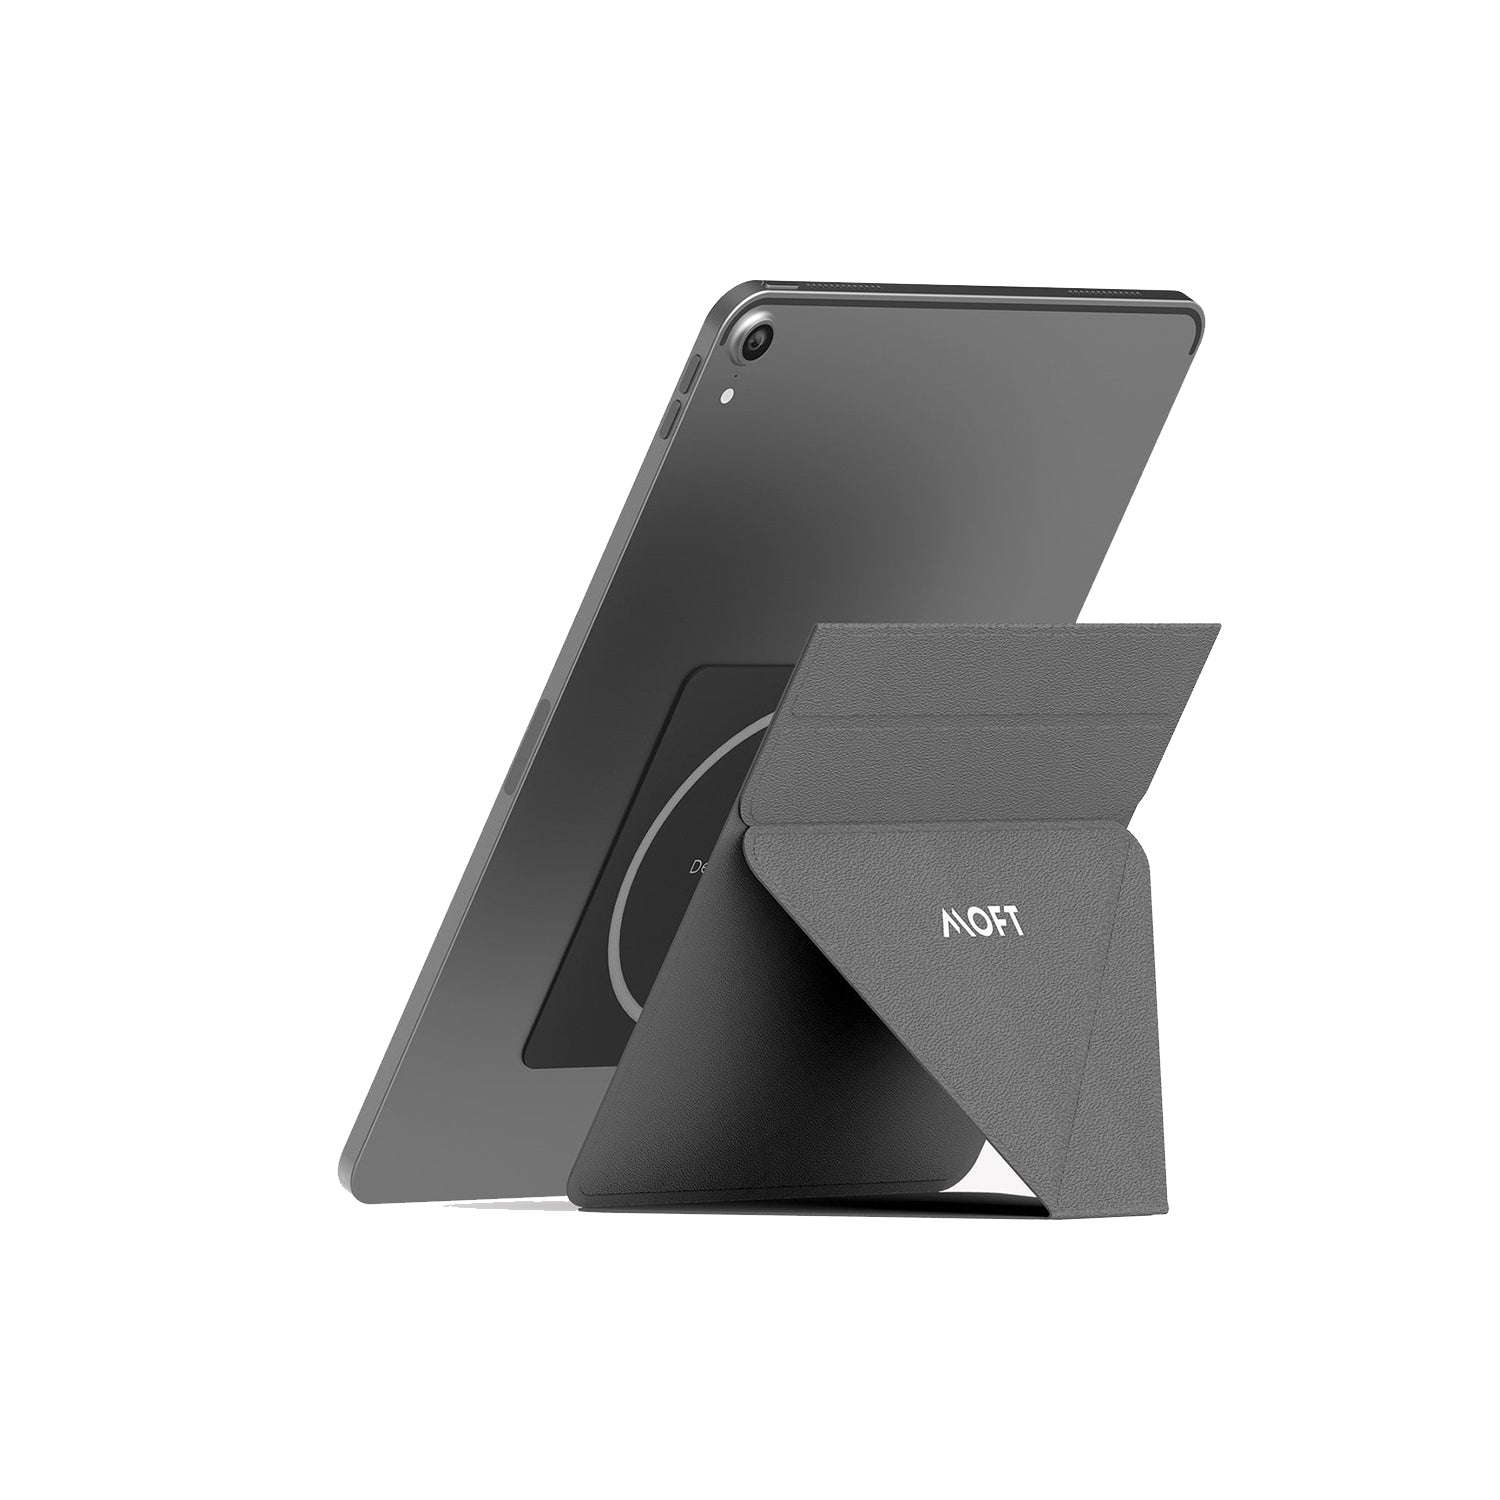 MOFT Snap Tablet Stand for 9.7" or Larger Tablets